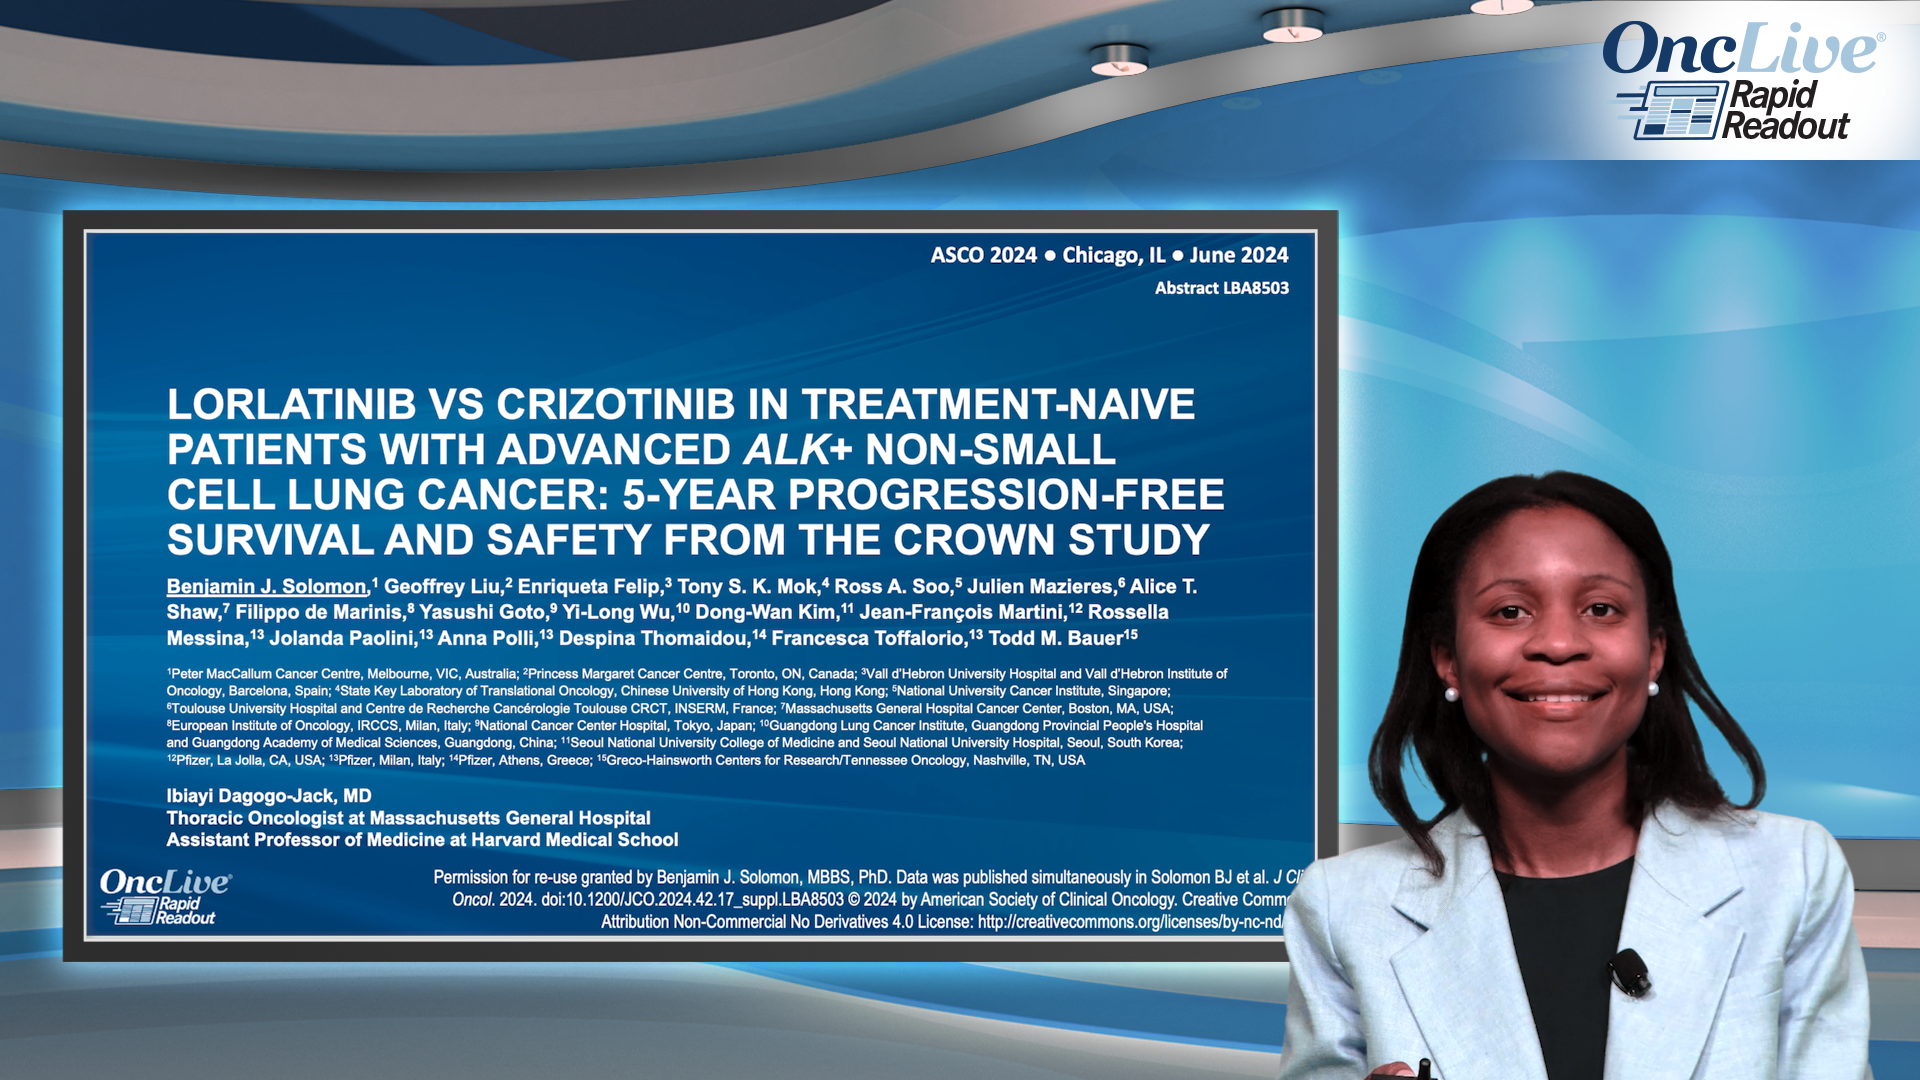 Lorlatinib vs Crizotinib in Treatment-Naive Patients With Advanced ALK+ Non-Small Cell Lung Cancer: 5-Year Progression-Free Survival and Safety From the CROWN Study